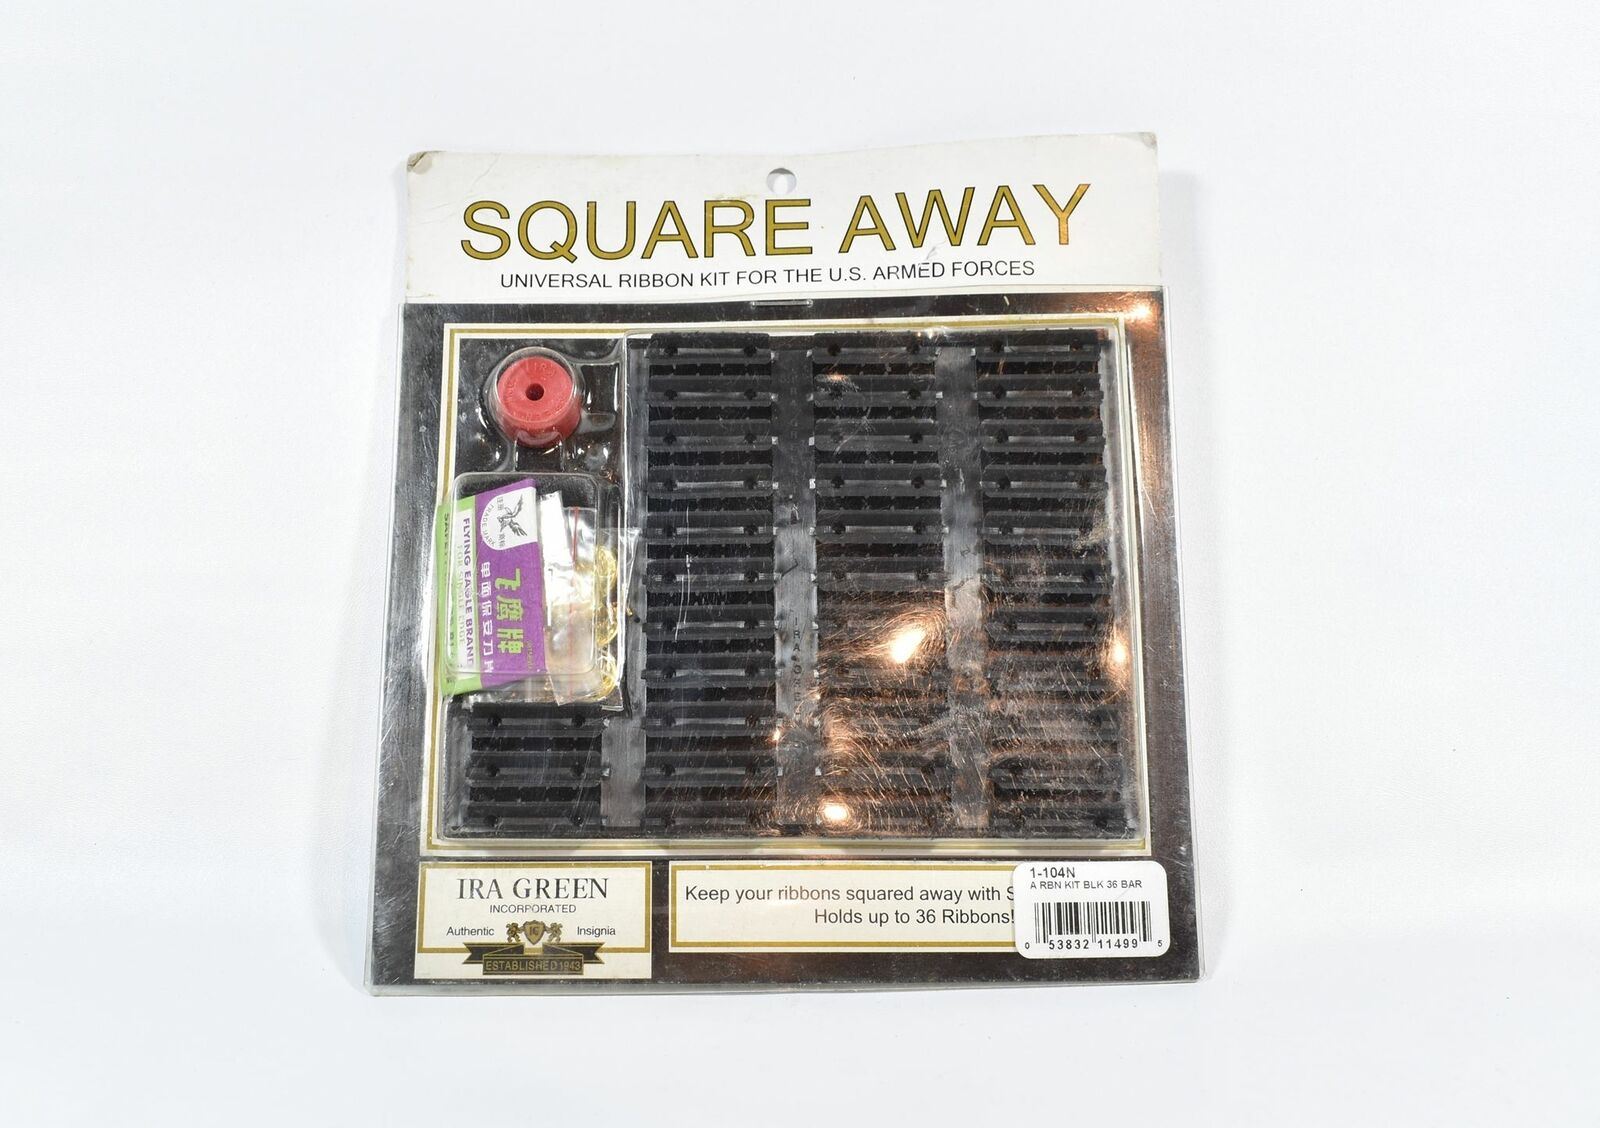 Military Square Away Ribbon Kit NEW US. Armed Forces IRA GEEN KIT